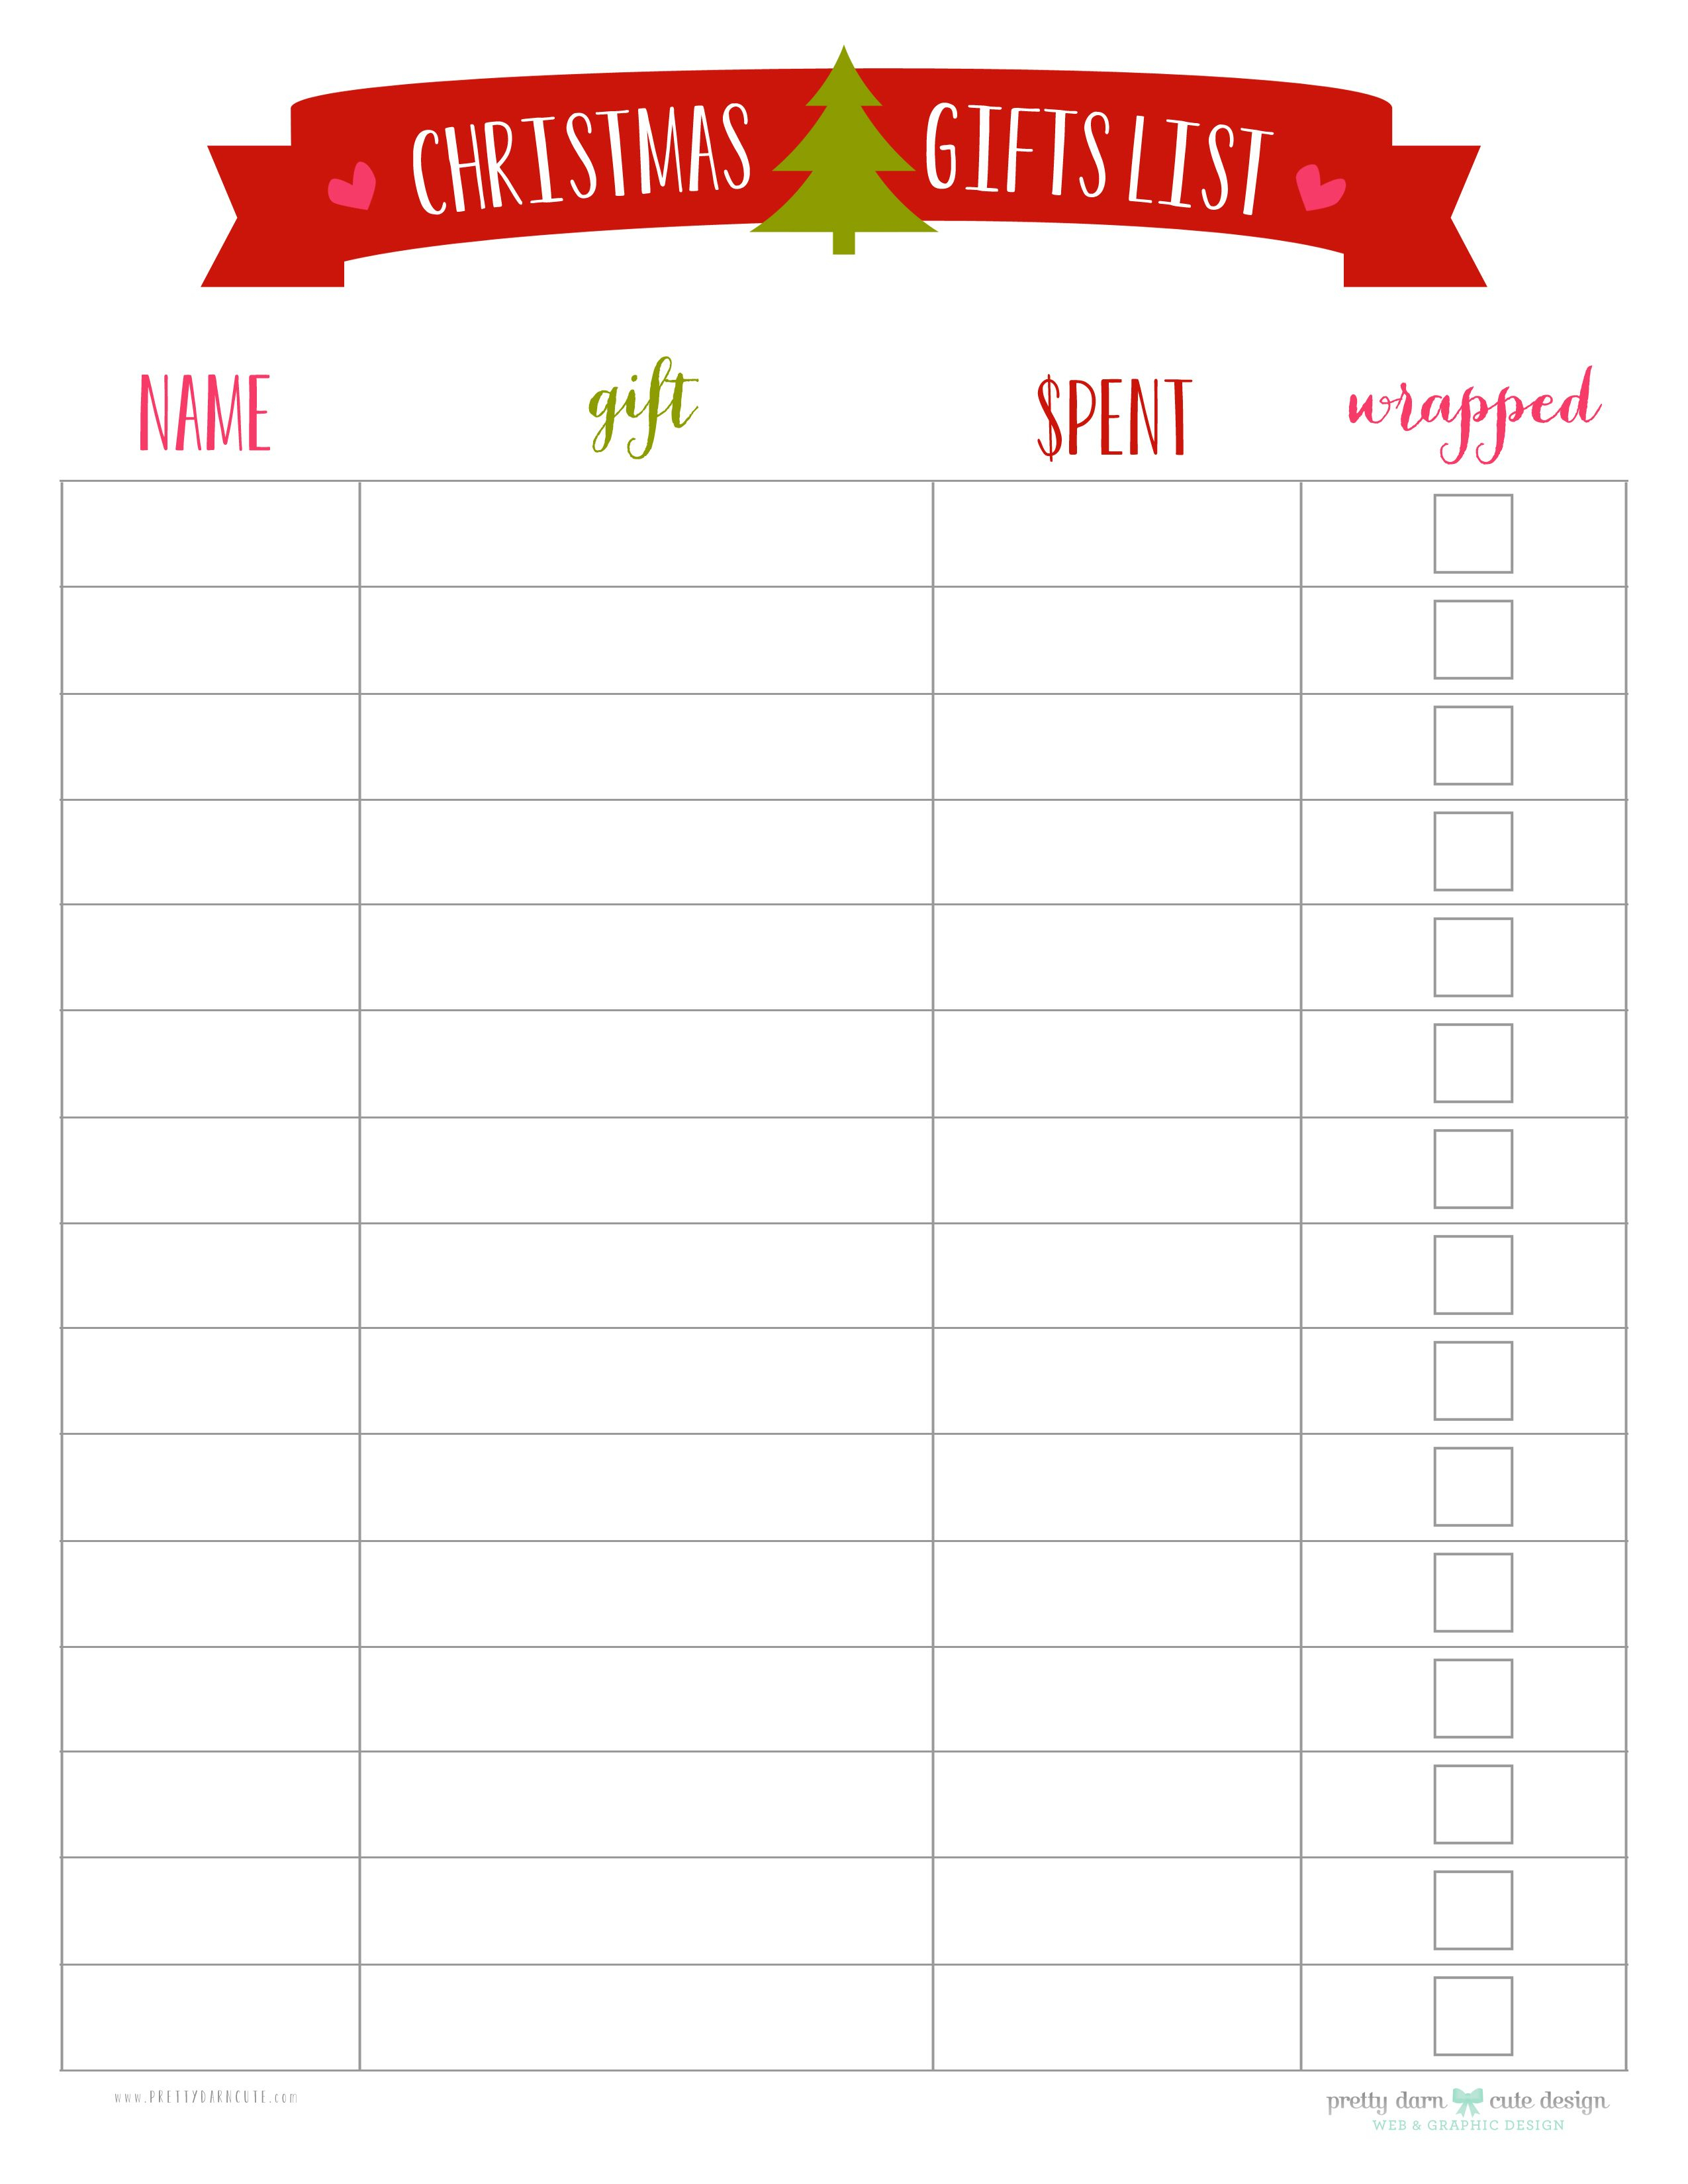 Christmas List Printable, In Case I Decide To Feel Organized In Christmas Card List Template